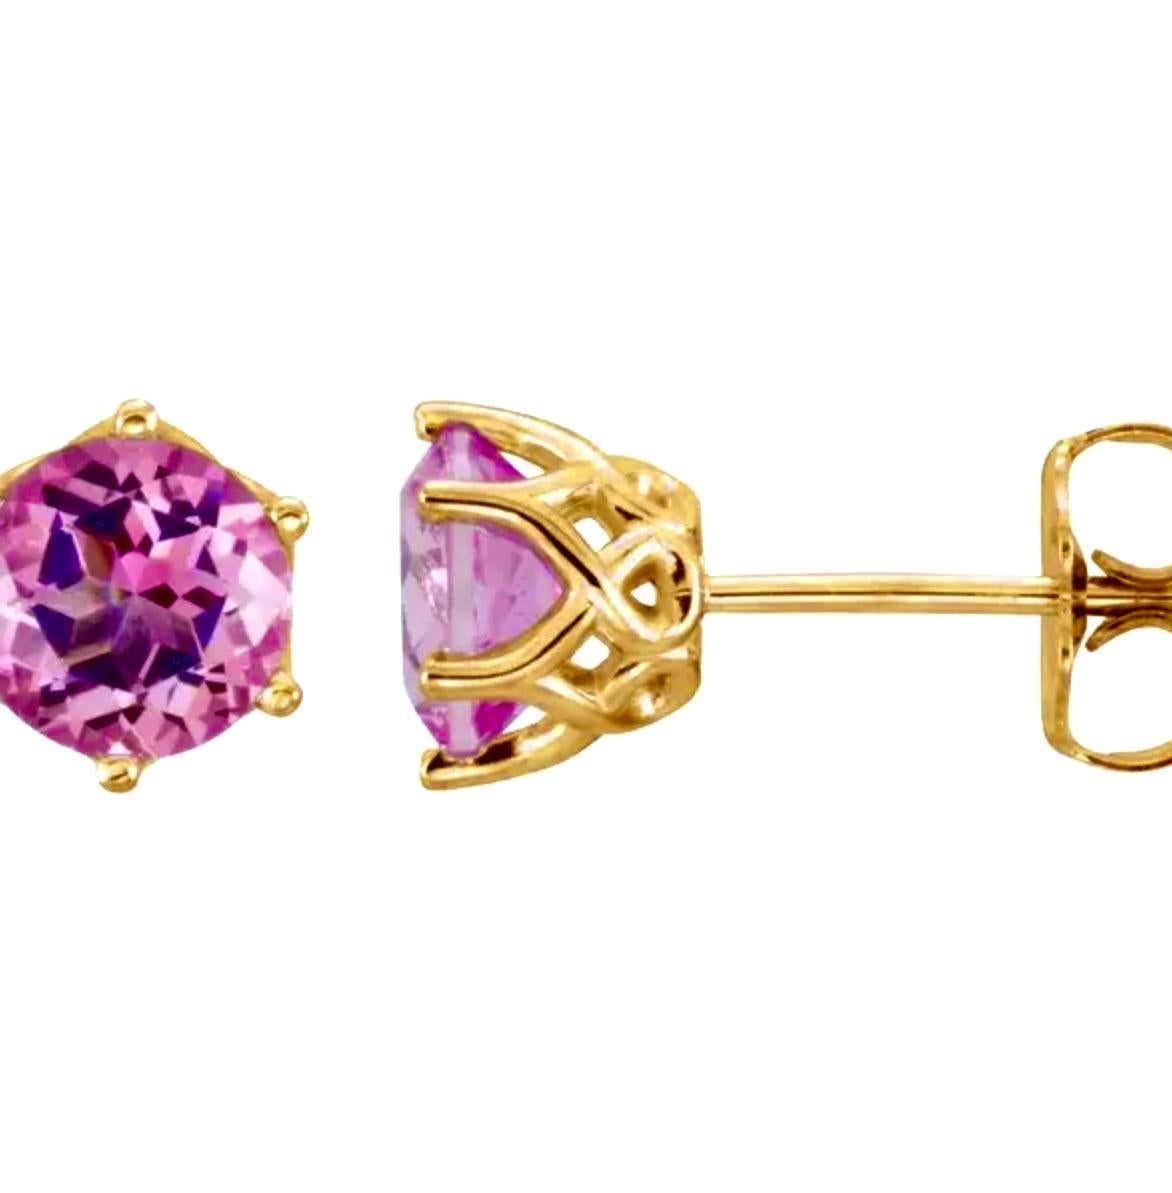 Classic pink Ceylon Sapphire yellow gold, white gold, or platinum stud Earrings
Stud earrings set with two natural Ceylon round sapphires weighing 1.12 carat
Dimensions: 5mm diameter.

**Made to order, custom options are available: Yellow, white